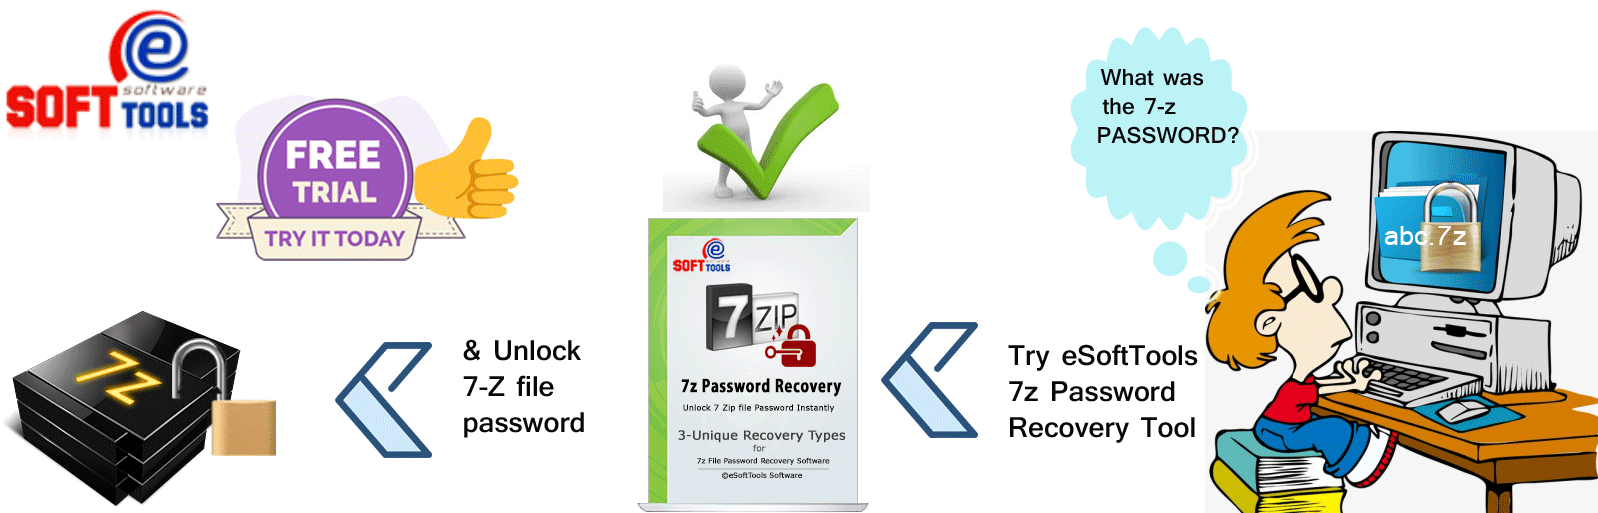 How to recover 7z file password? c959c016-964e-4cfb-a960-44e13096fd11?upload=true.png